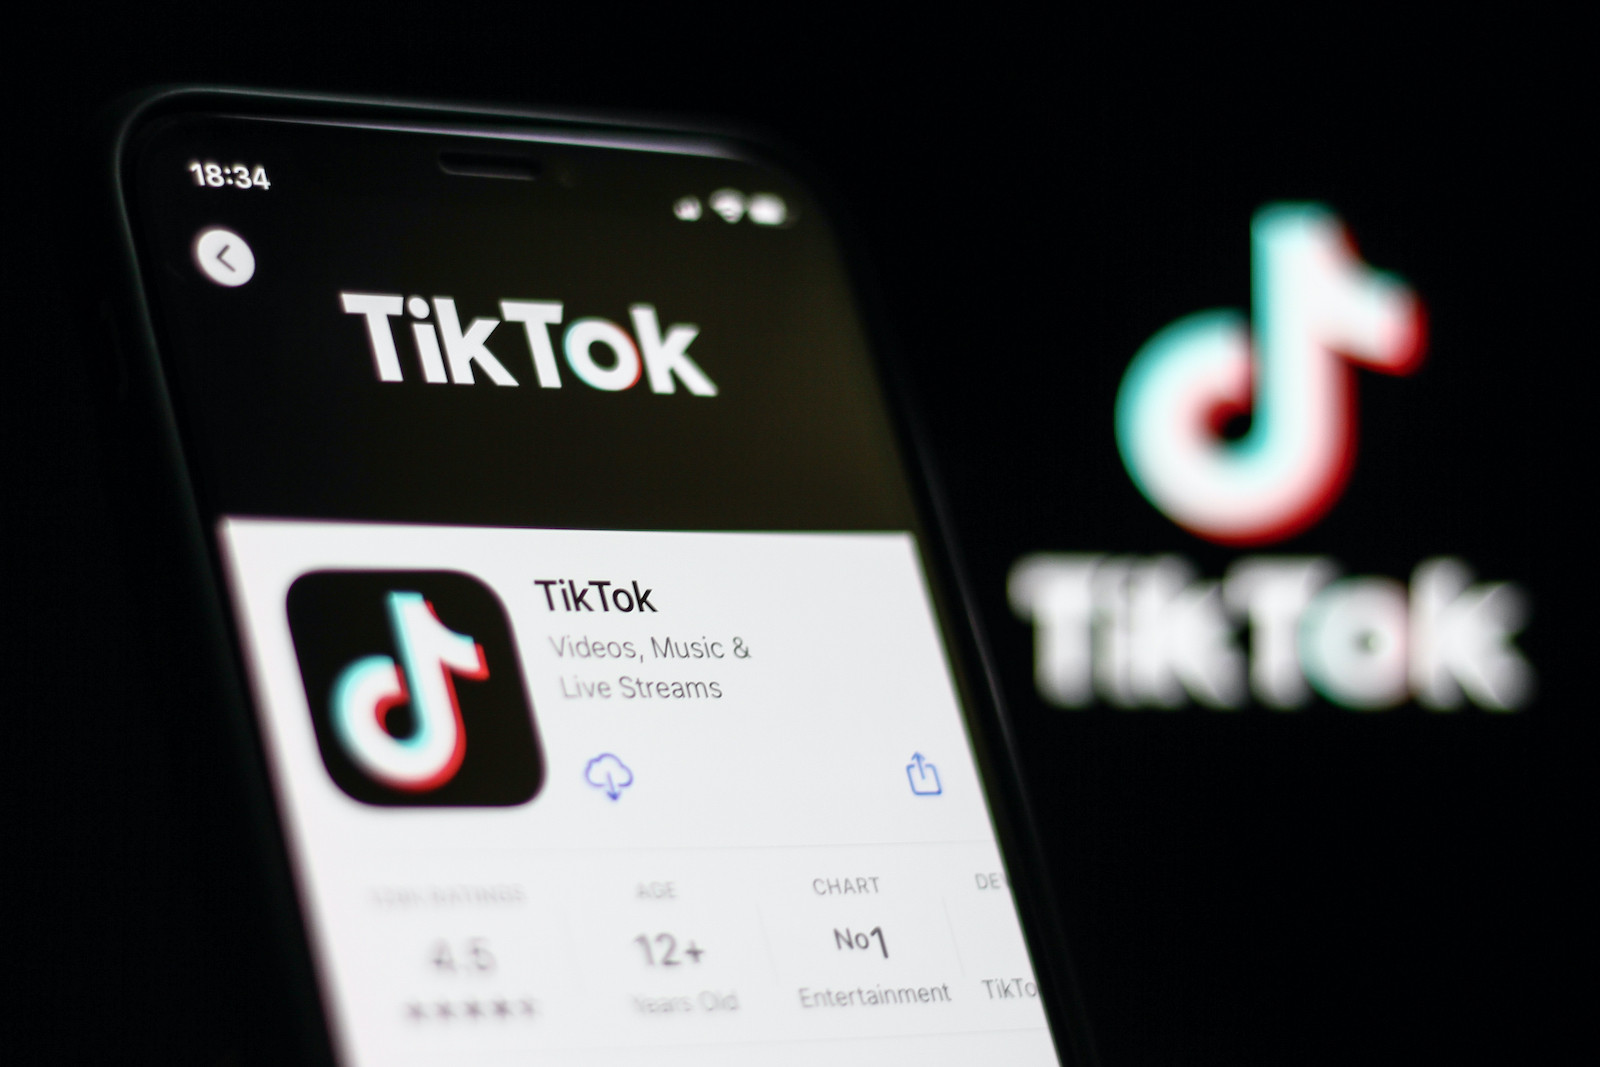 download tiktok video without posting